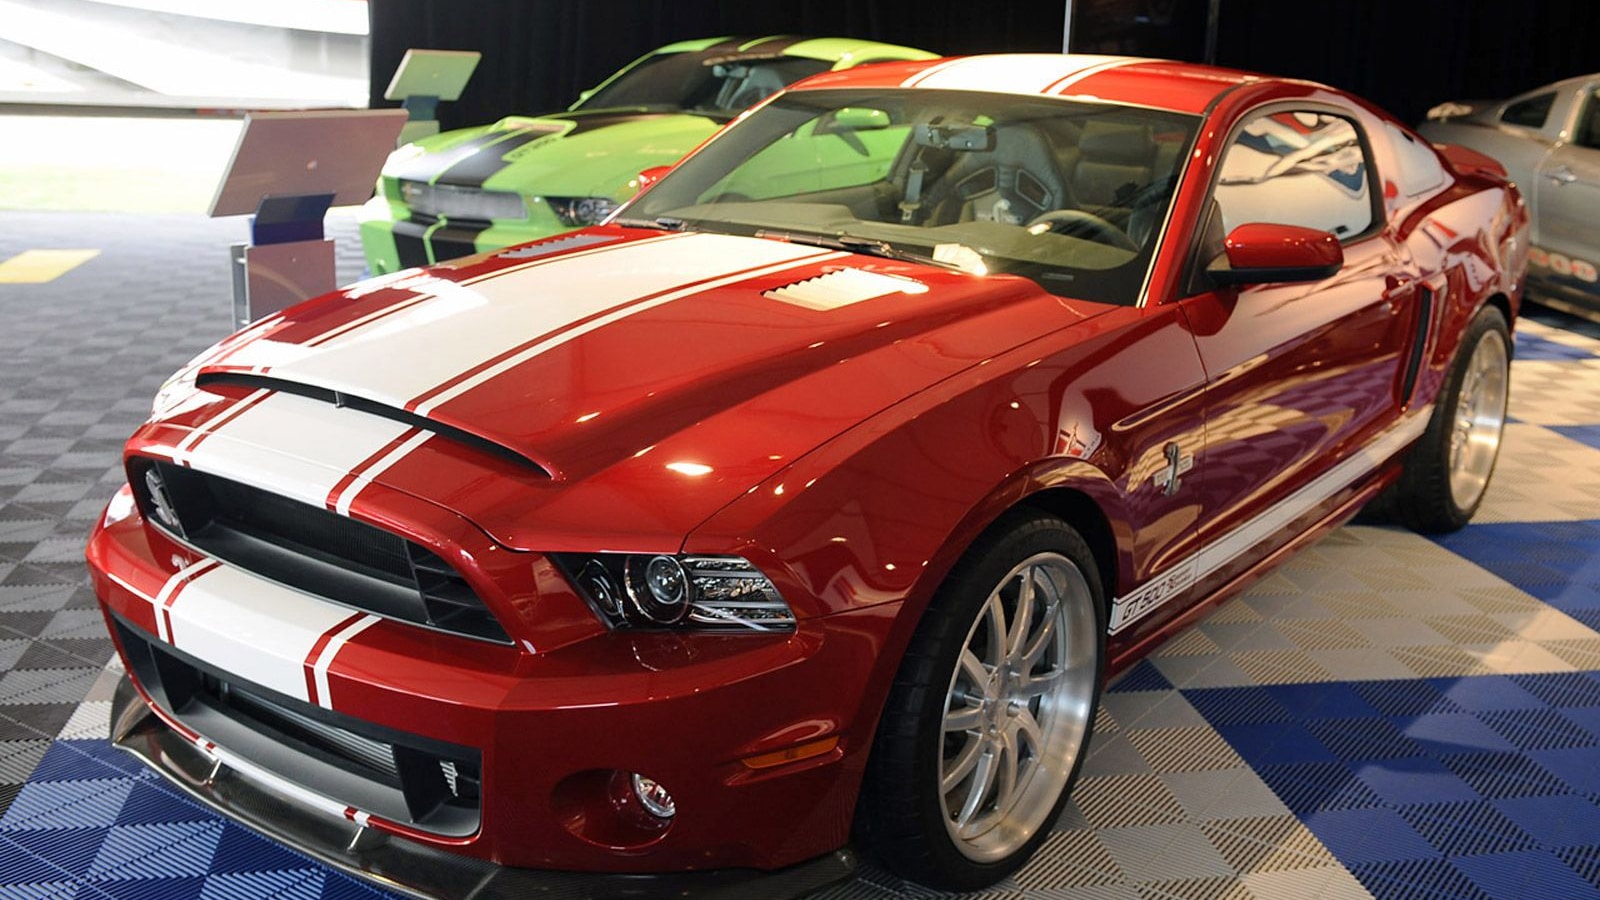 2013 Ford Mustang Shelby GT500 Super Snake prototype